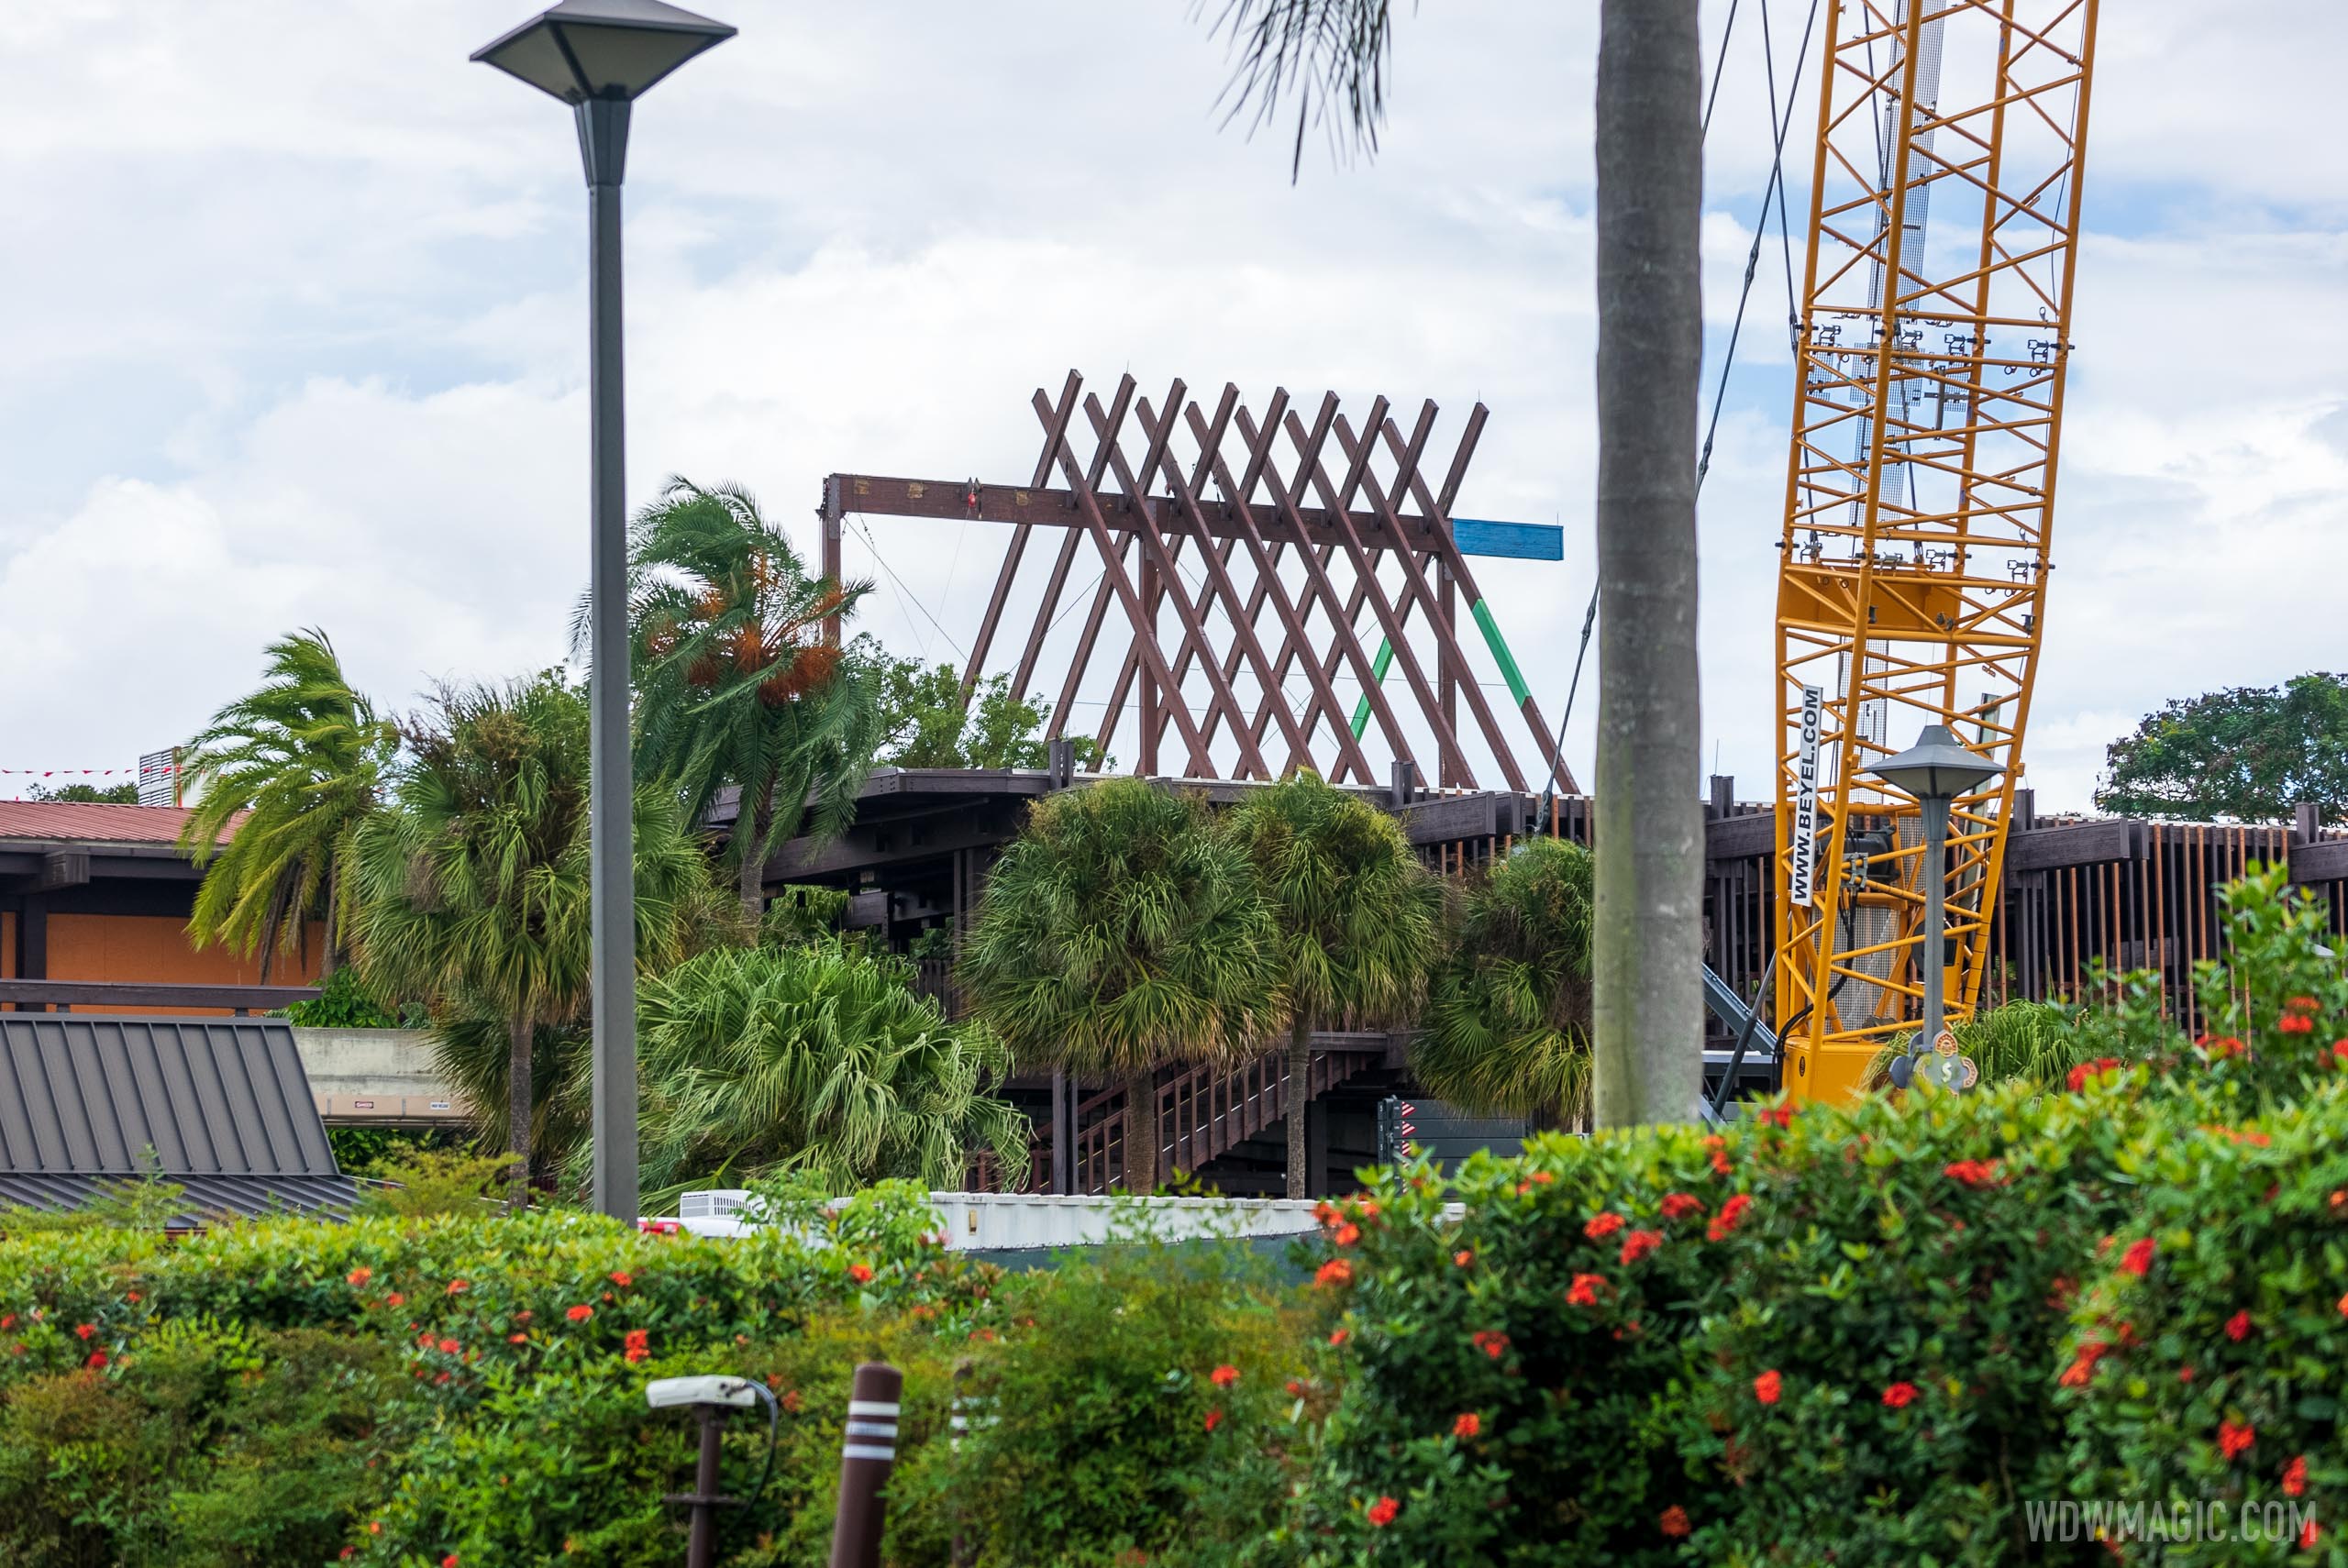 Latest look at the Polynesian Village Resort roofline changes